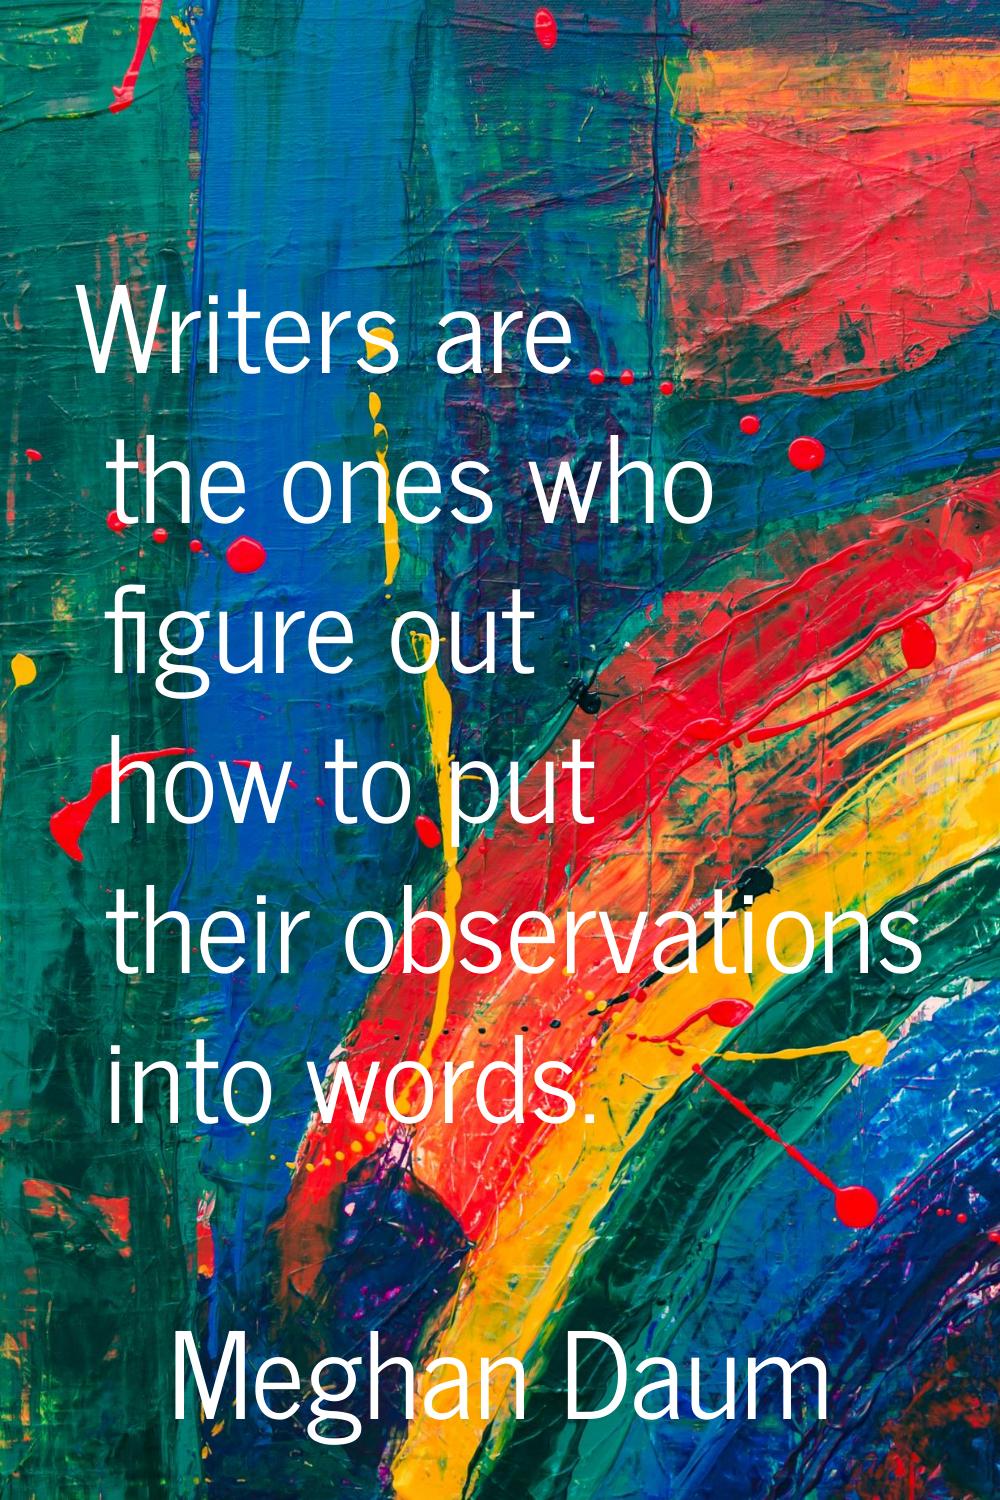 Writers are the ones who figure out how to put their observations into words.